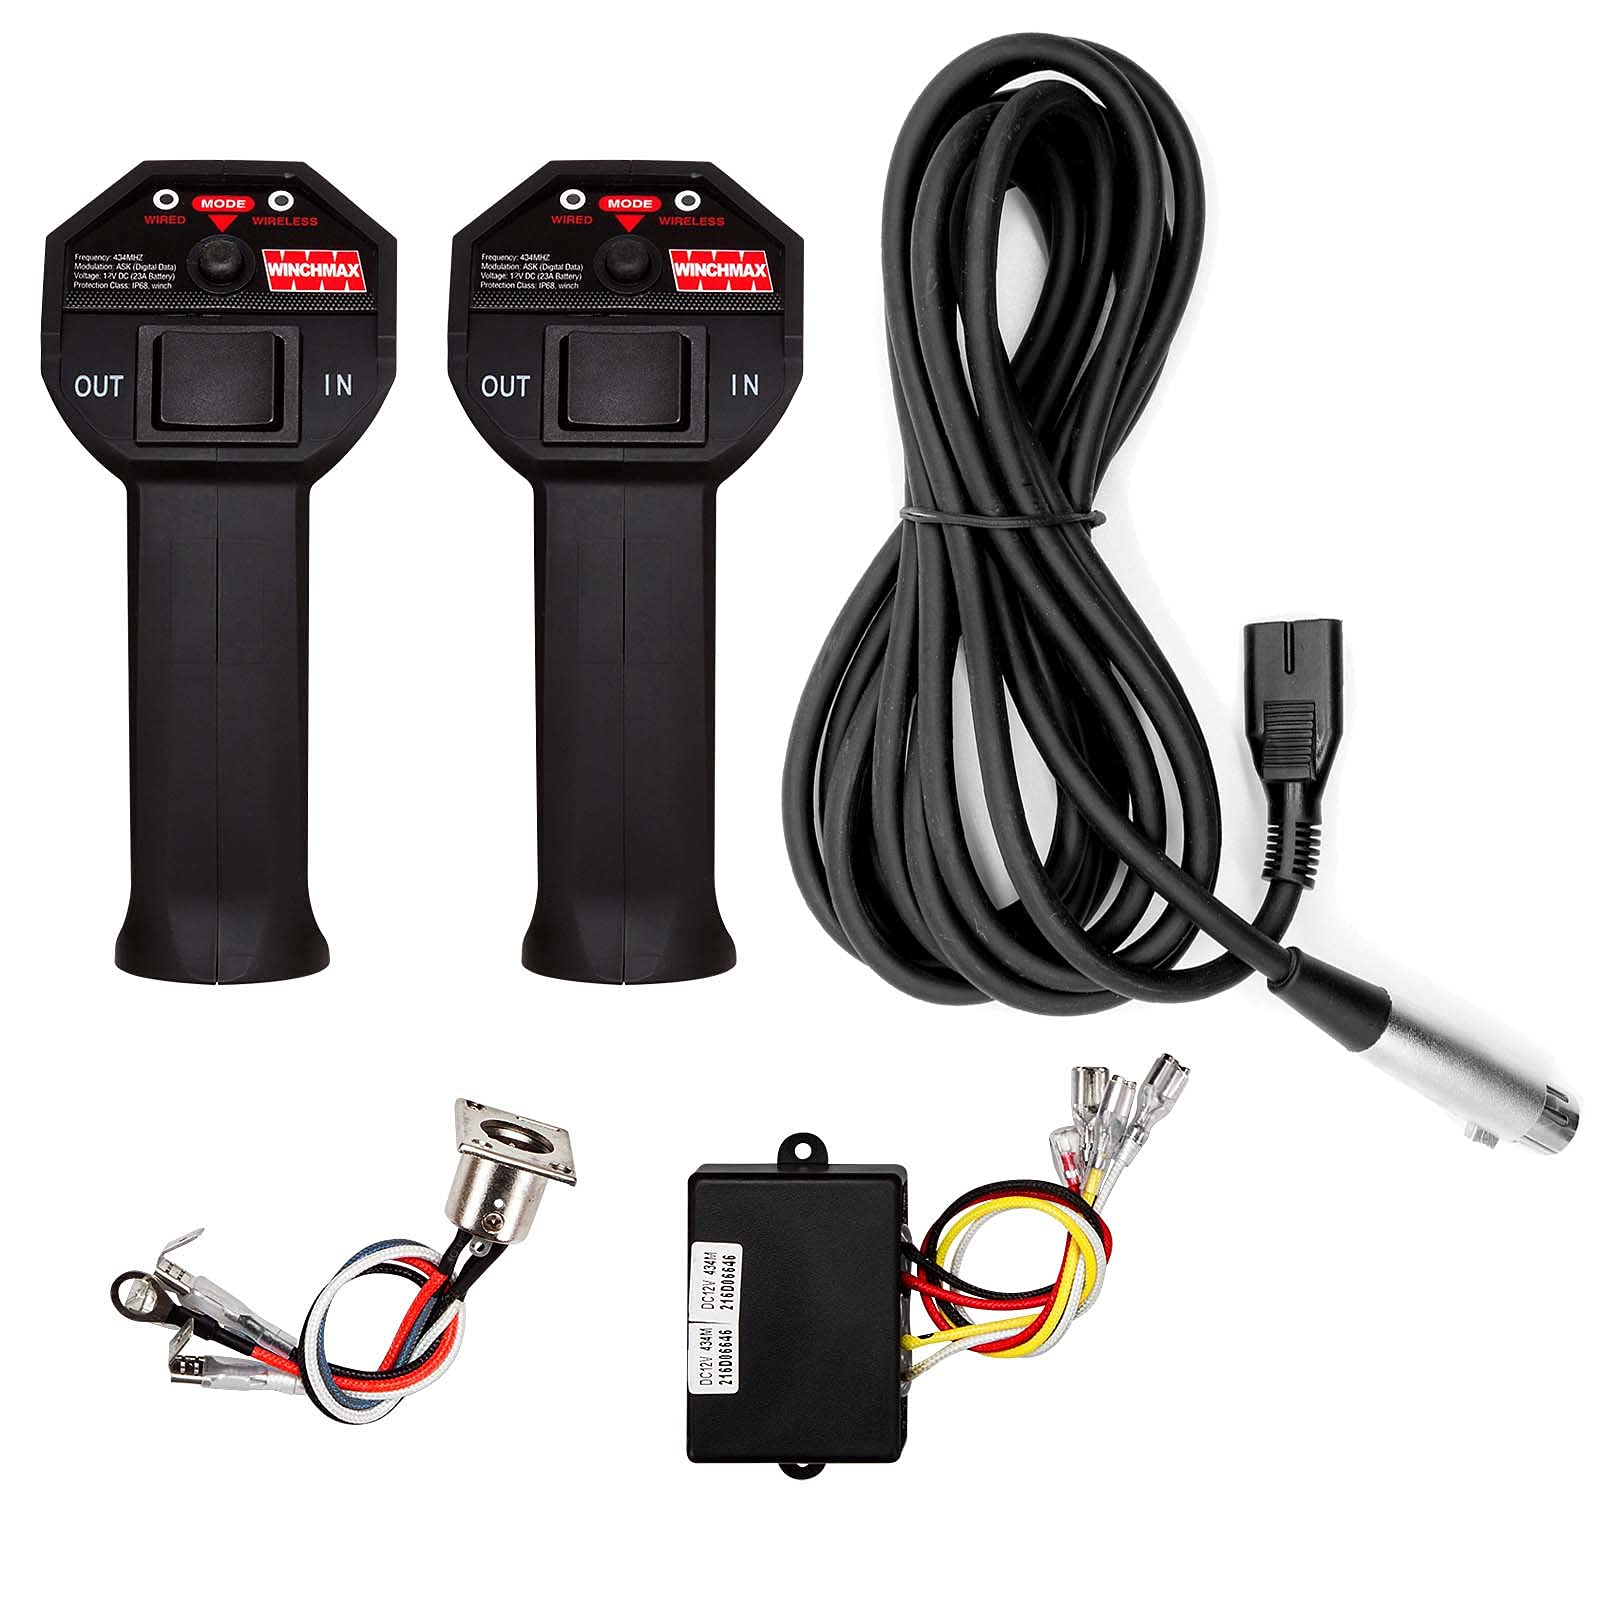 Winchmax 24v Winch Wireless Remote Control Kit, Twin SL Series Large Grip Handsets. Control Box Reciever 60mm x 45mm x 22mm. Long Operating Range 100ft / 30m von Winchmax